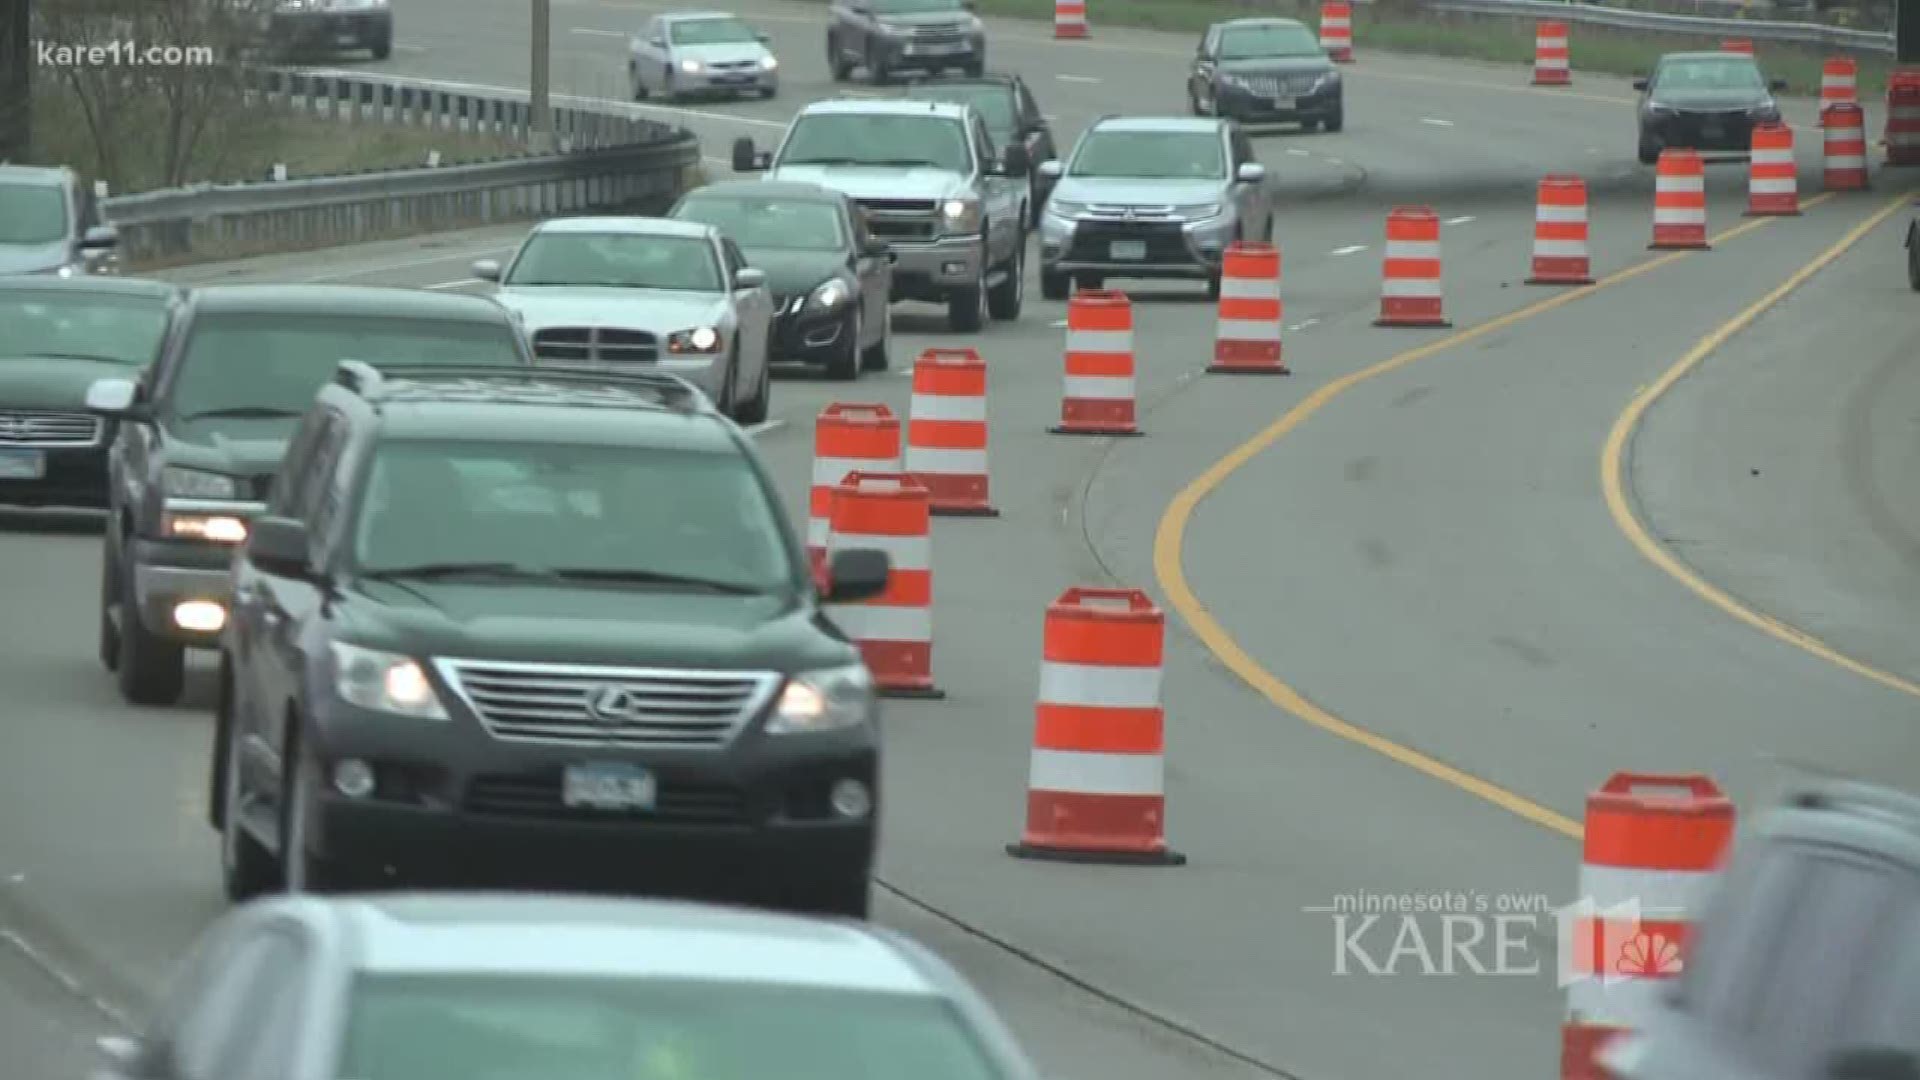 The $7 billion package includes a $220 million boost in new spending for road projects across the state, including Hwy 212 in Carver Co. and Hwy 8 in Chisago Co.